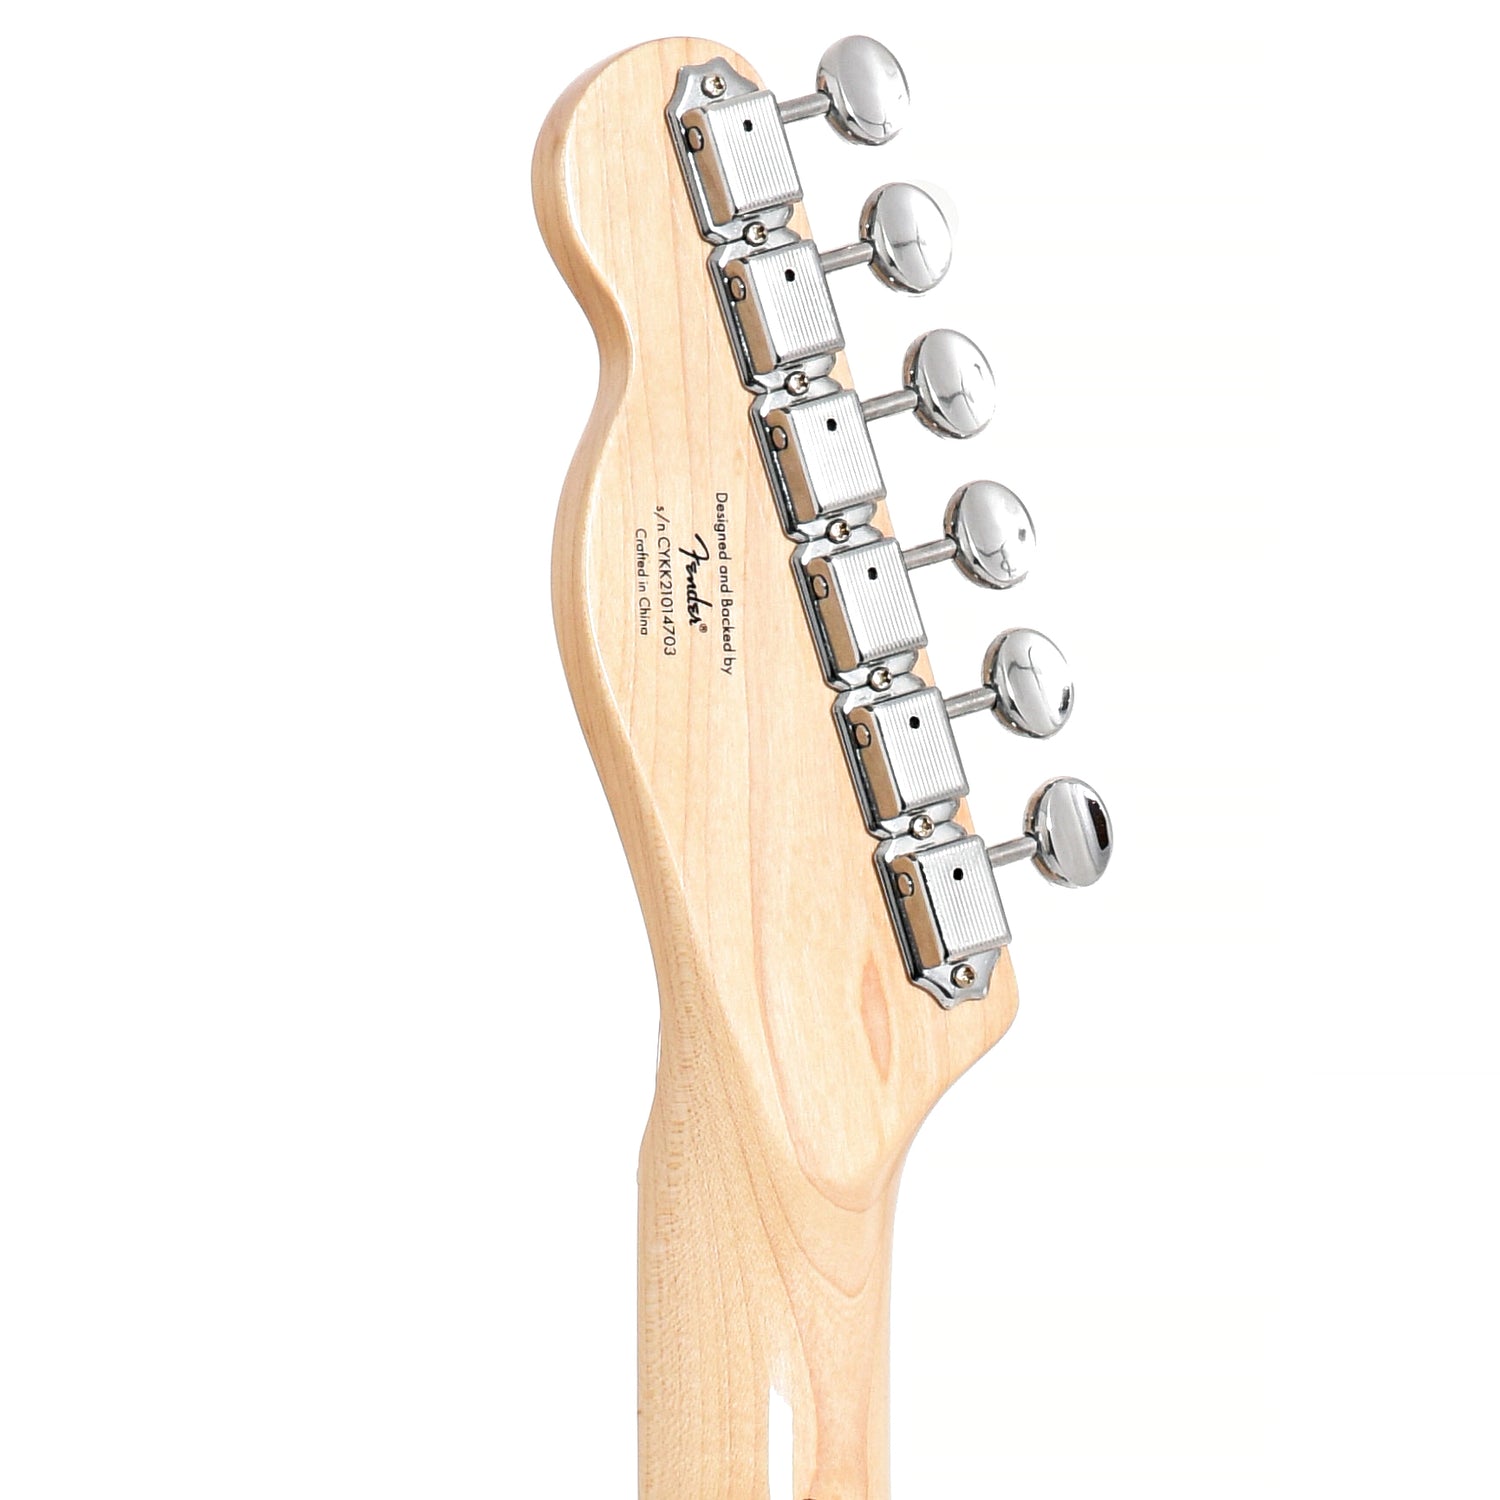 Image 8 of Squier Paranormal Cabronita Telecaster Thinline, Lake Placid Blue- SKU# SPARACAB-LPB : Product Type Solid Body Electric Guitars : Elderly Instruments